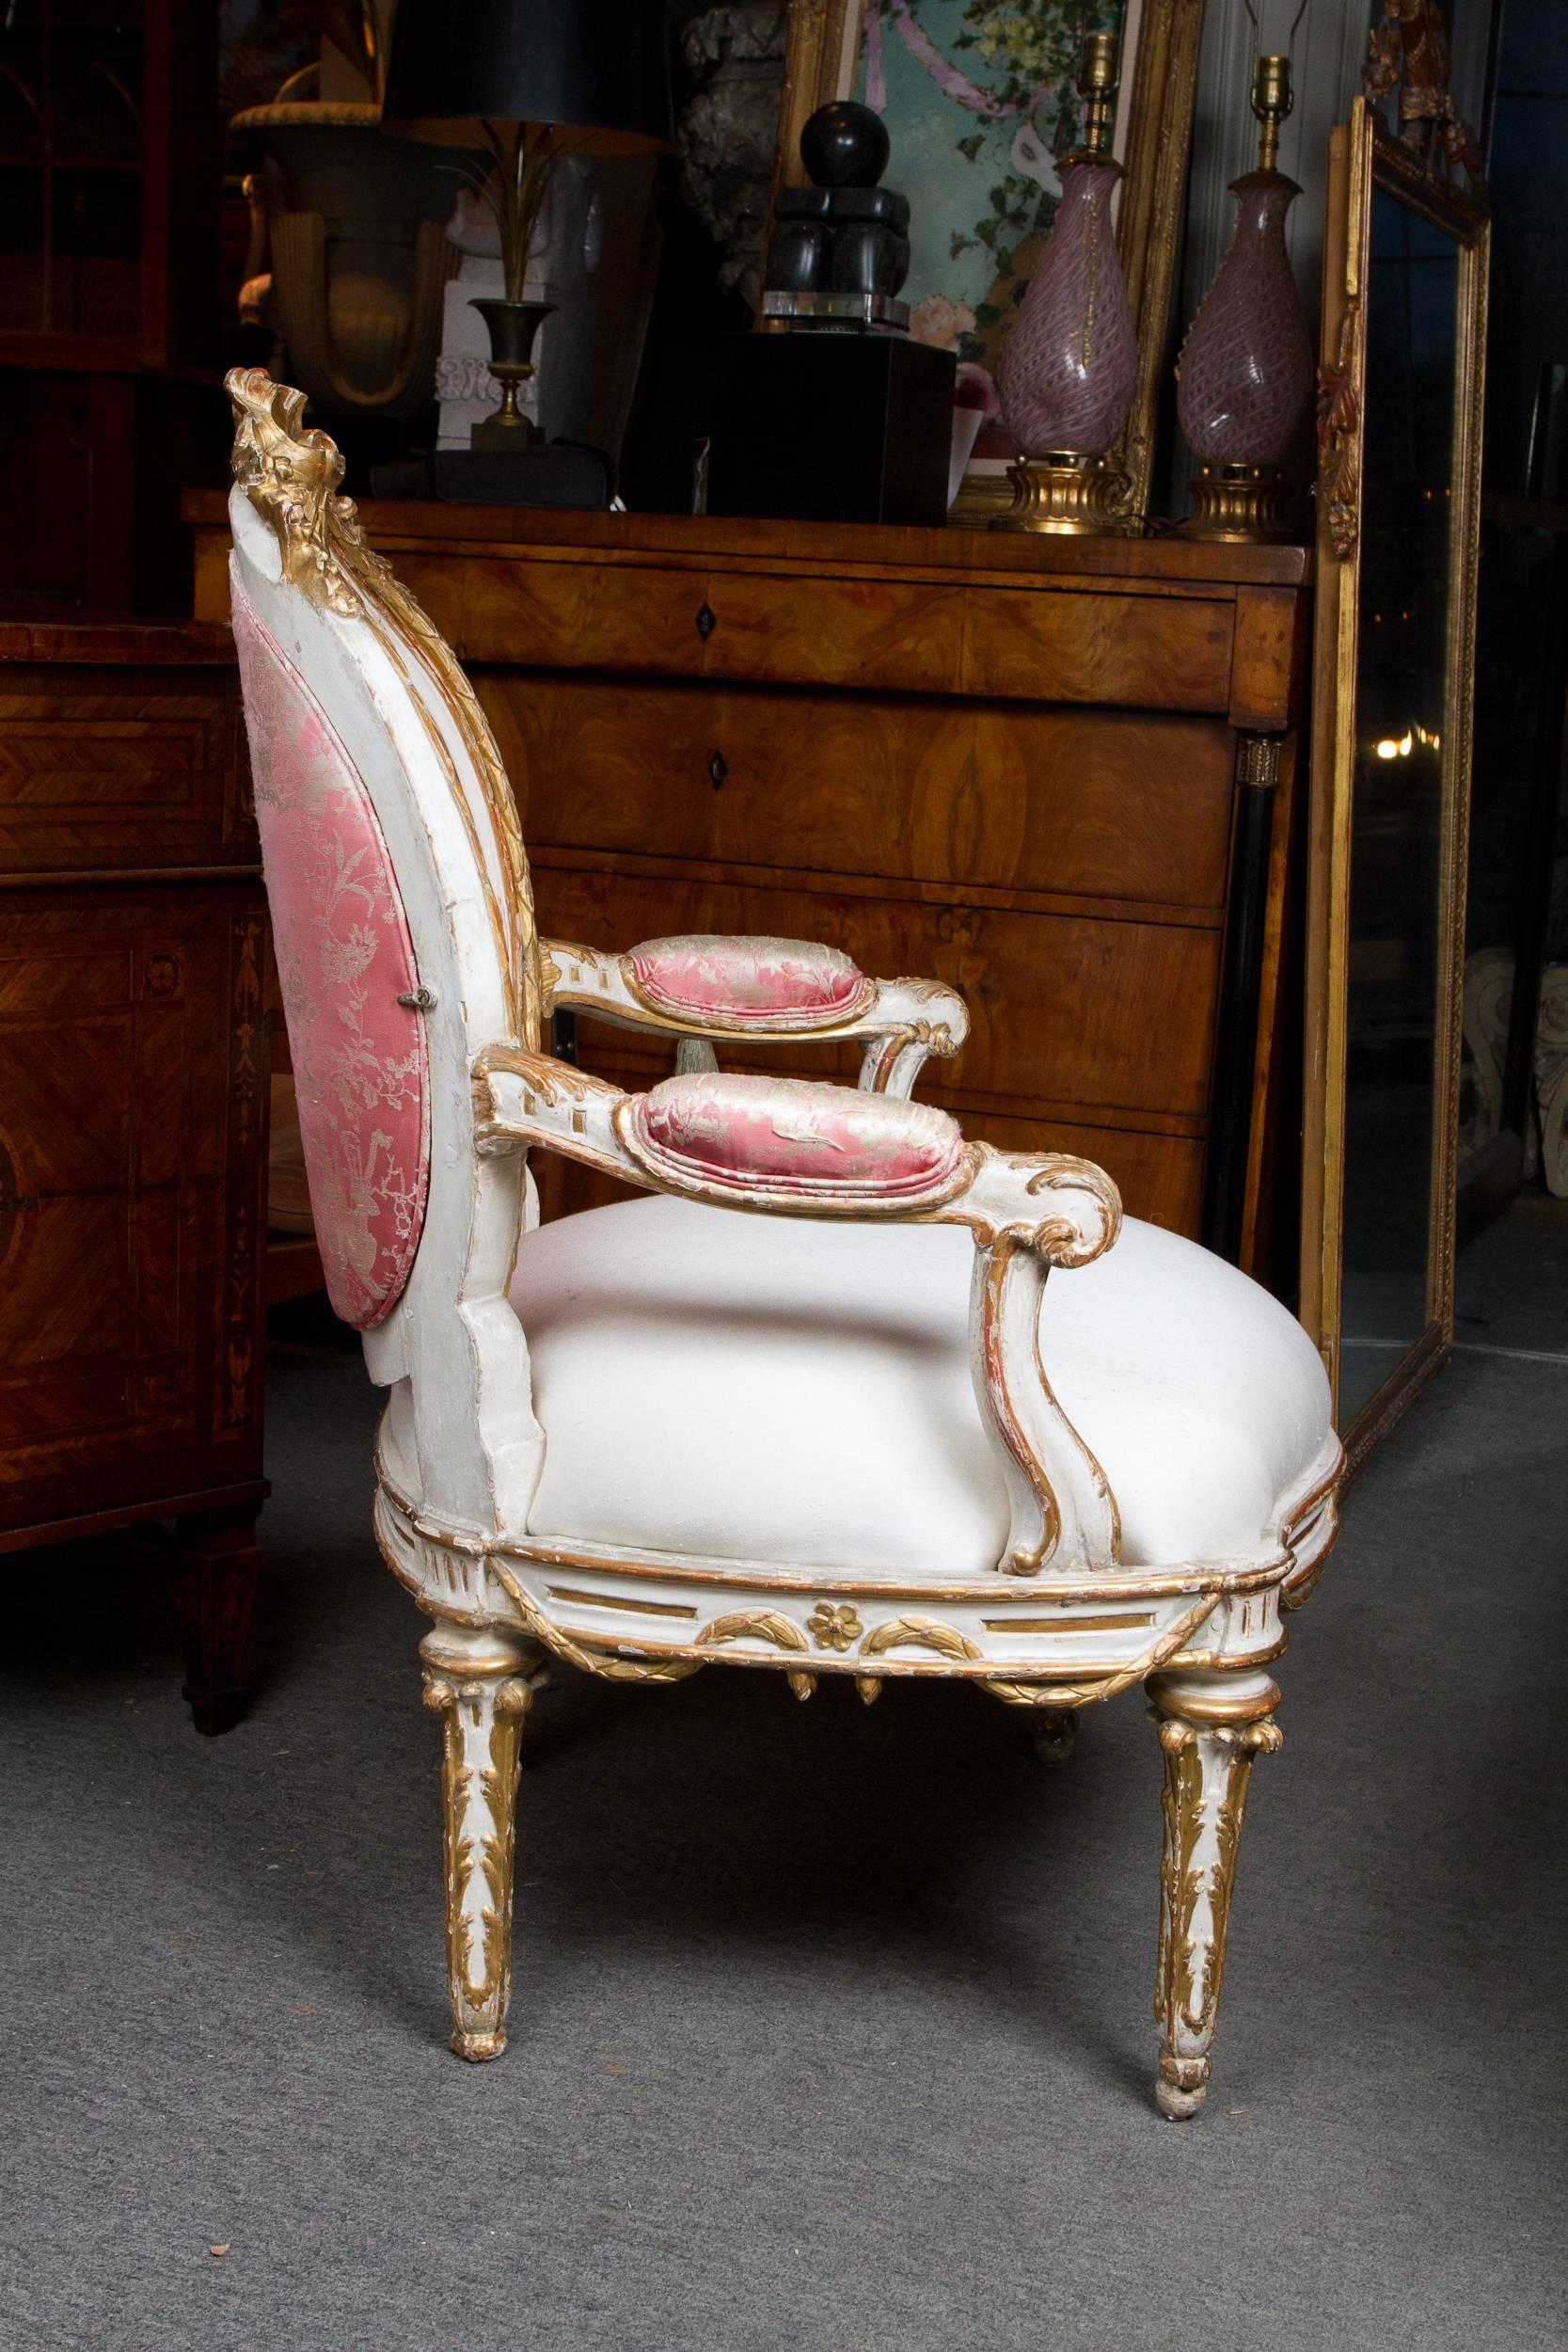 Elegant gilded and white painted upholstered Italian Louis XVI style armchair.
Provenance: Collection of corey hart's family.